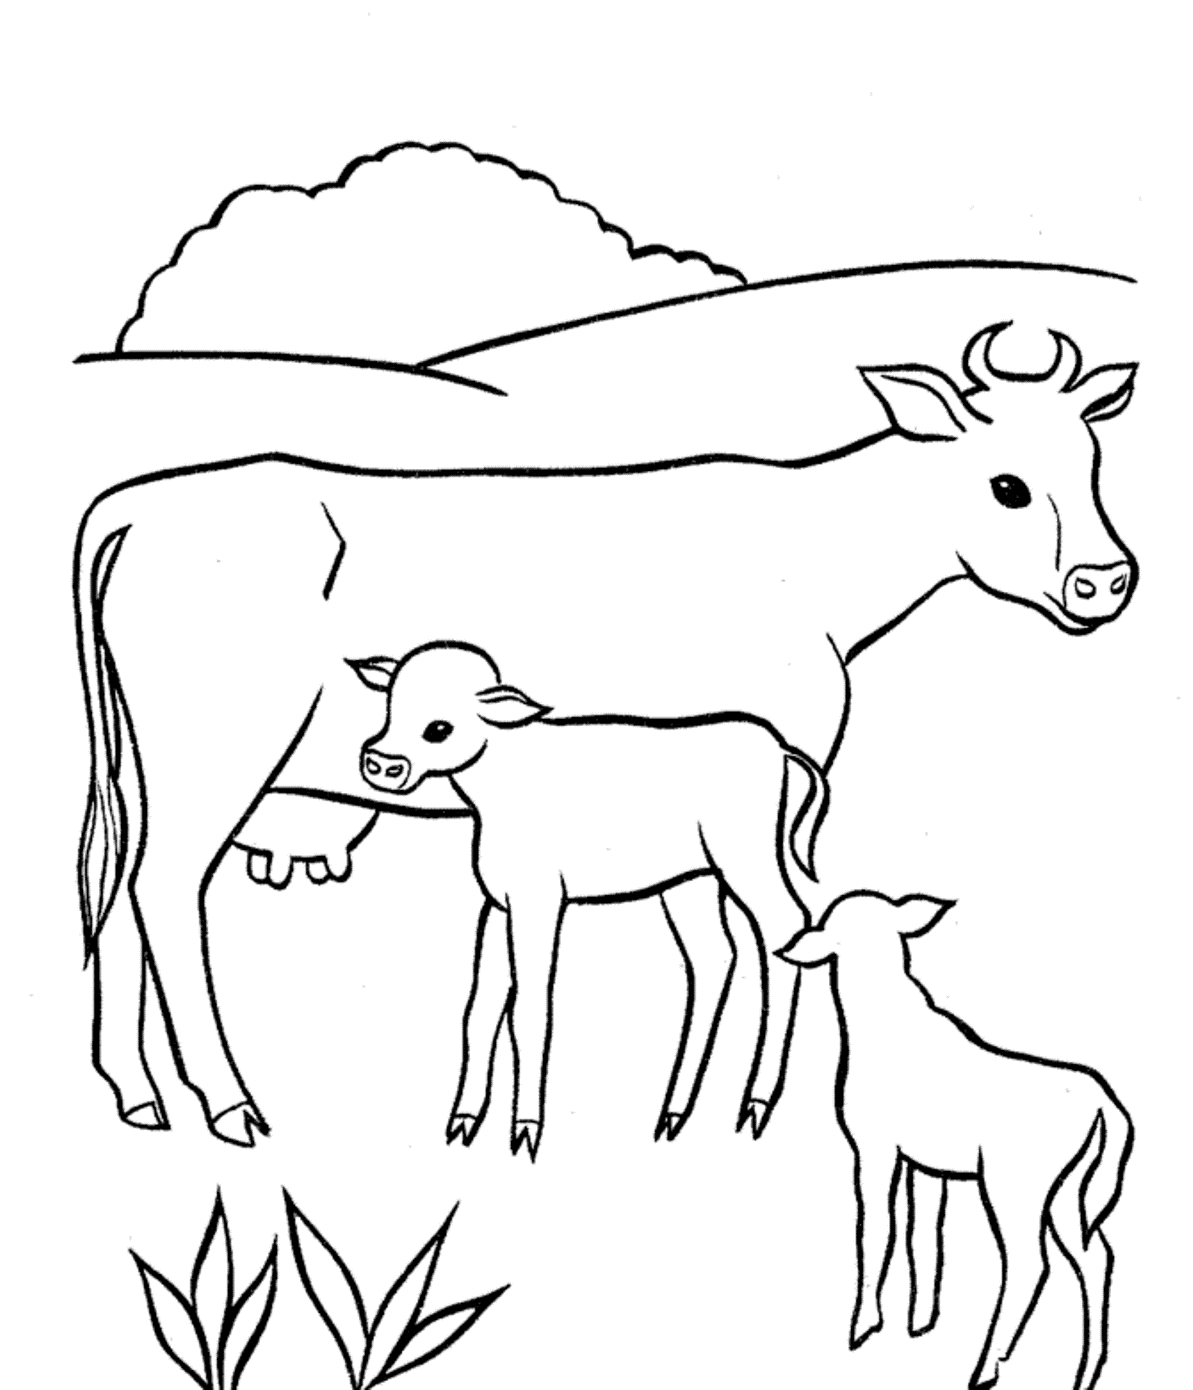 C Cow Coloring Pages - Coloring Home